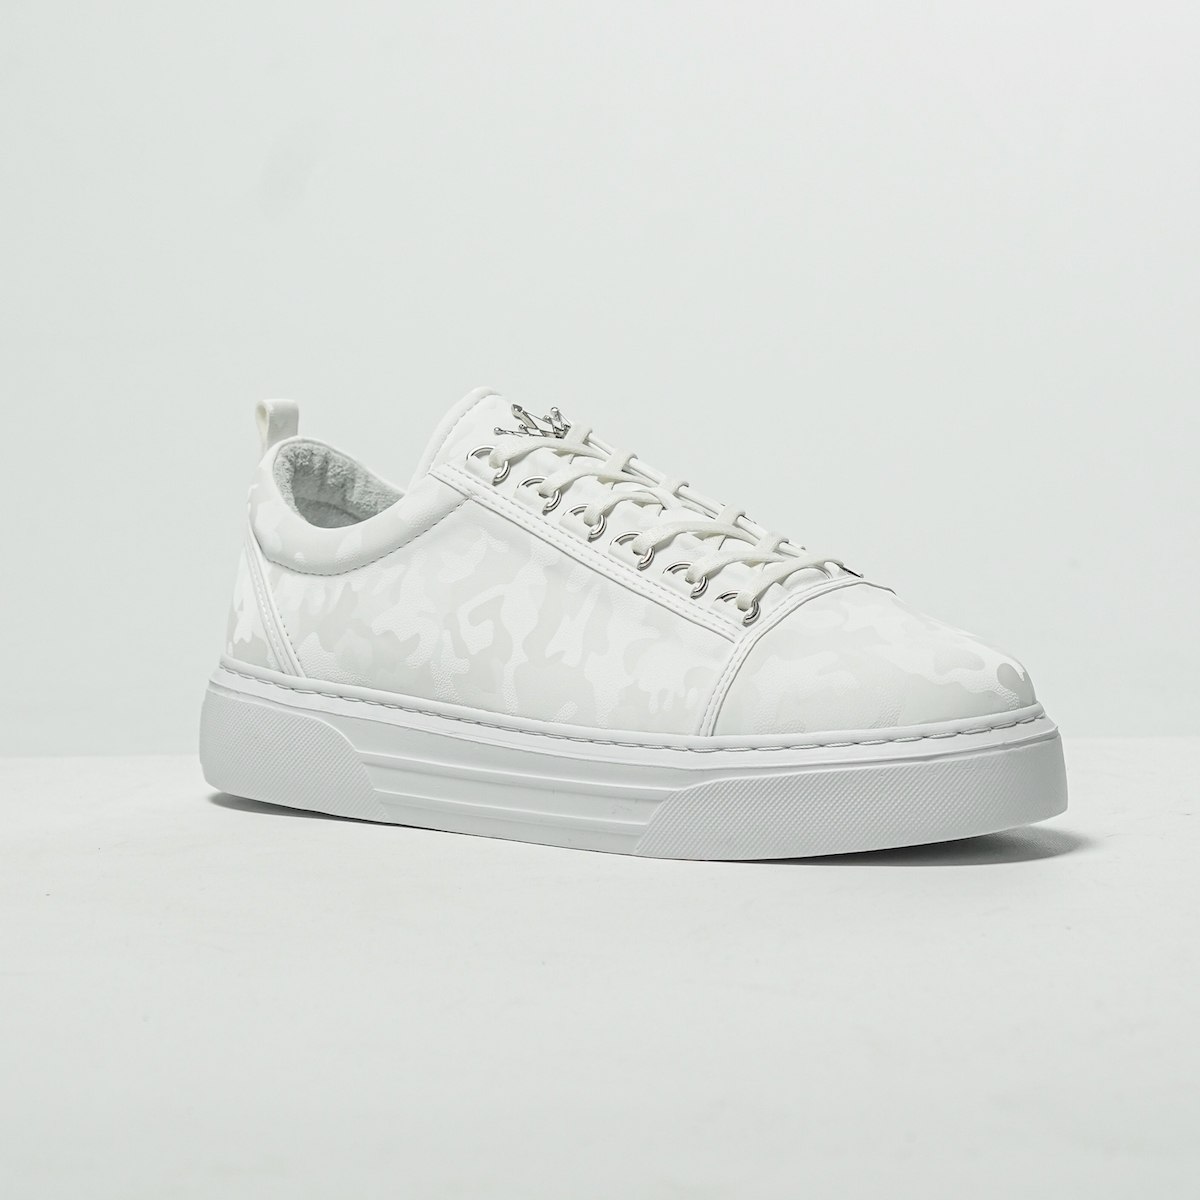 Men's Low Top Sneakers Crowned Designer Shoes Camo-White